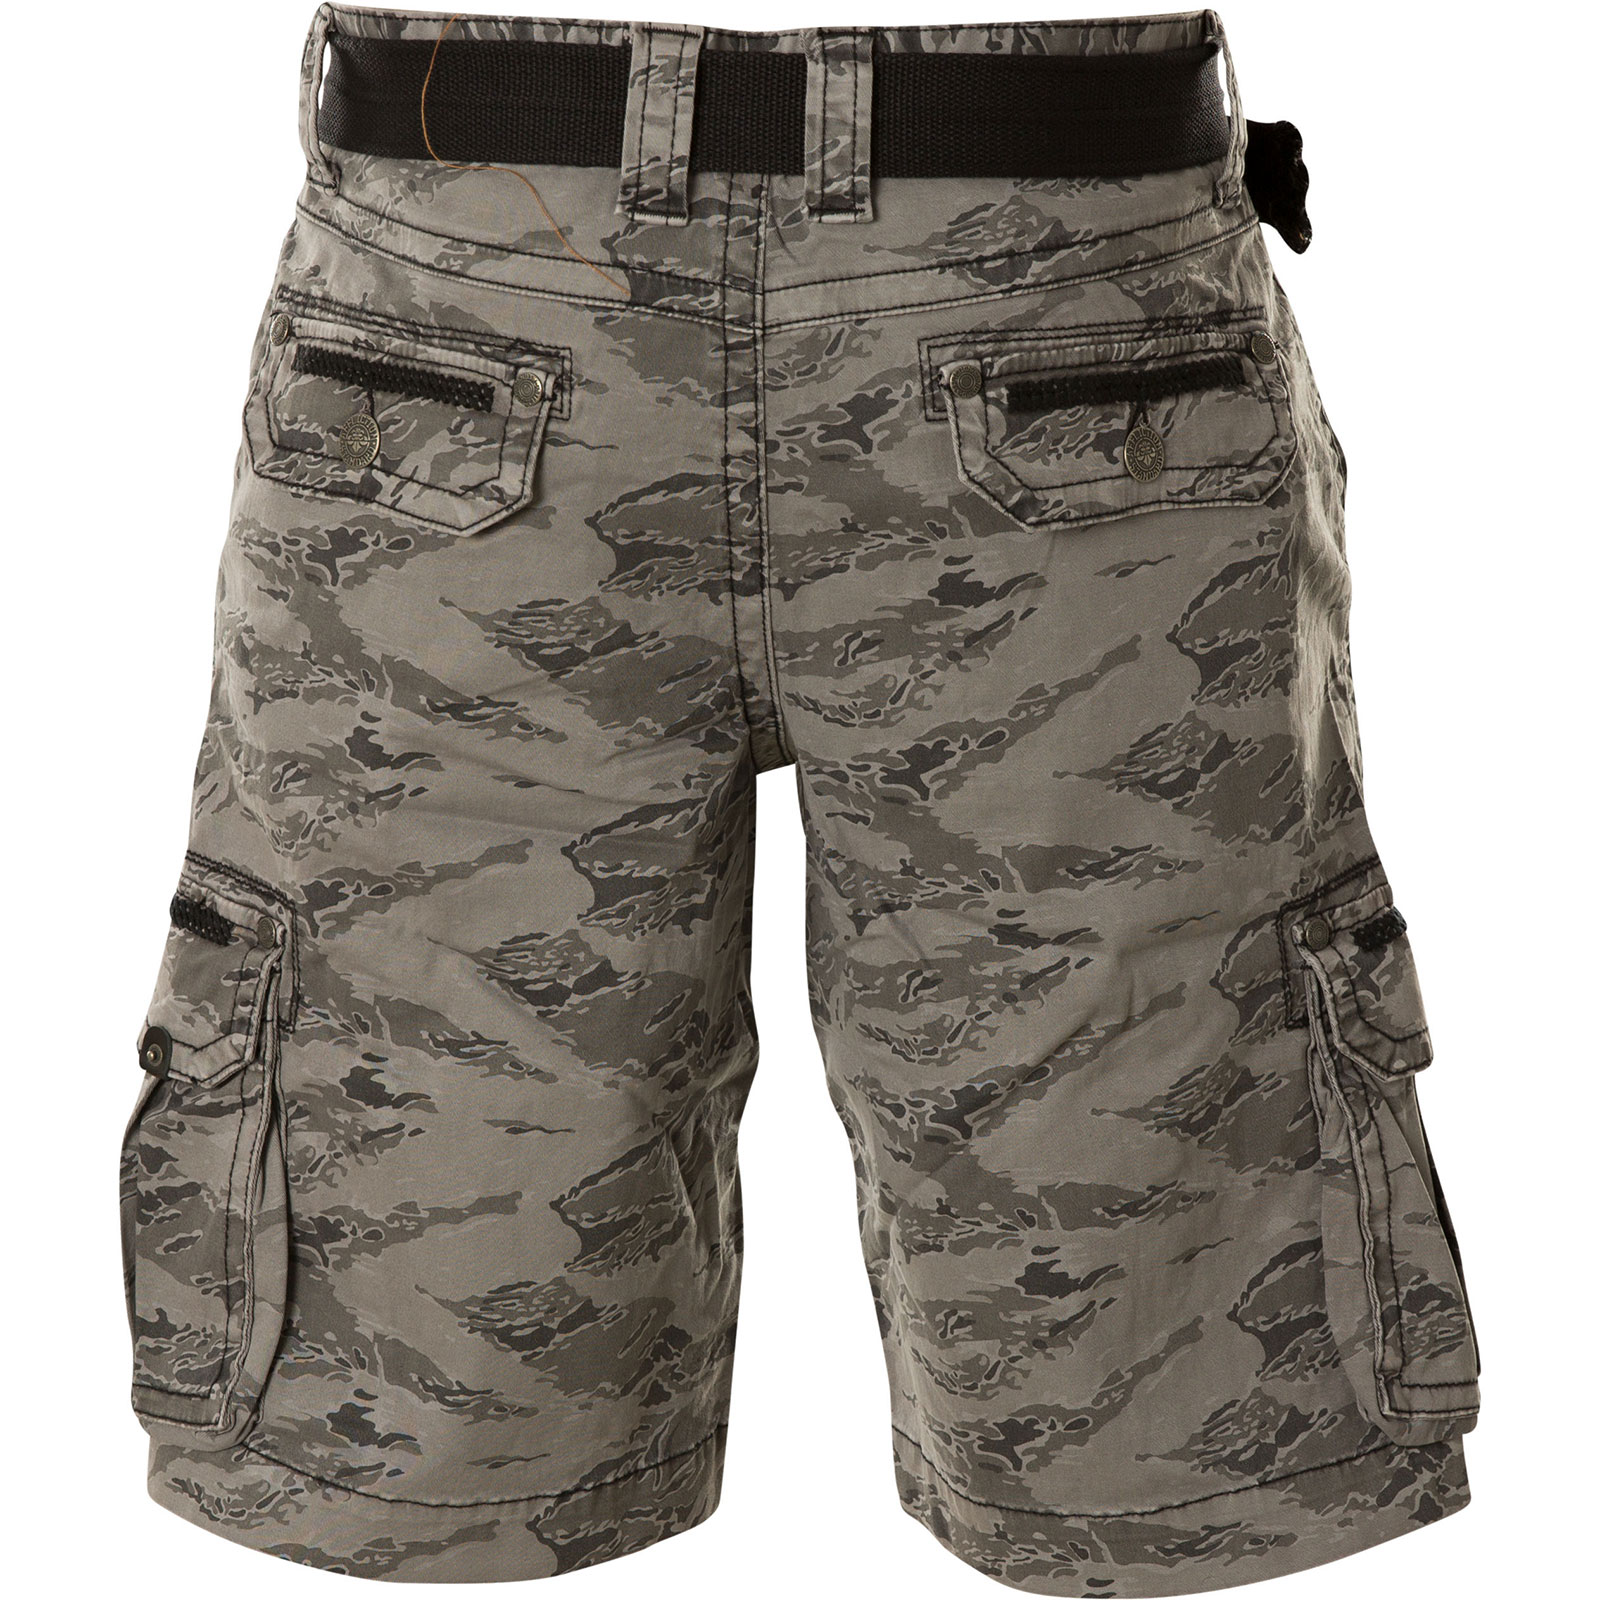 Affliction Gavin Cargo Shorts with embroidering